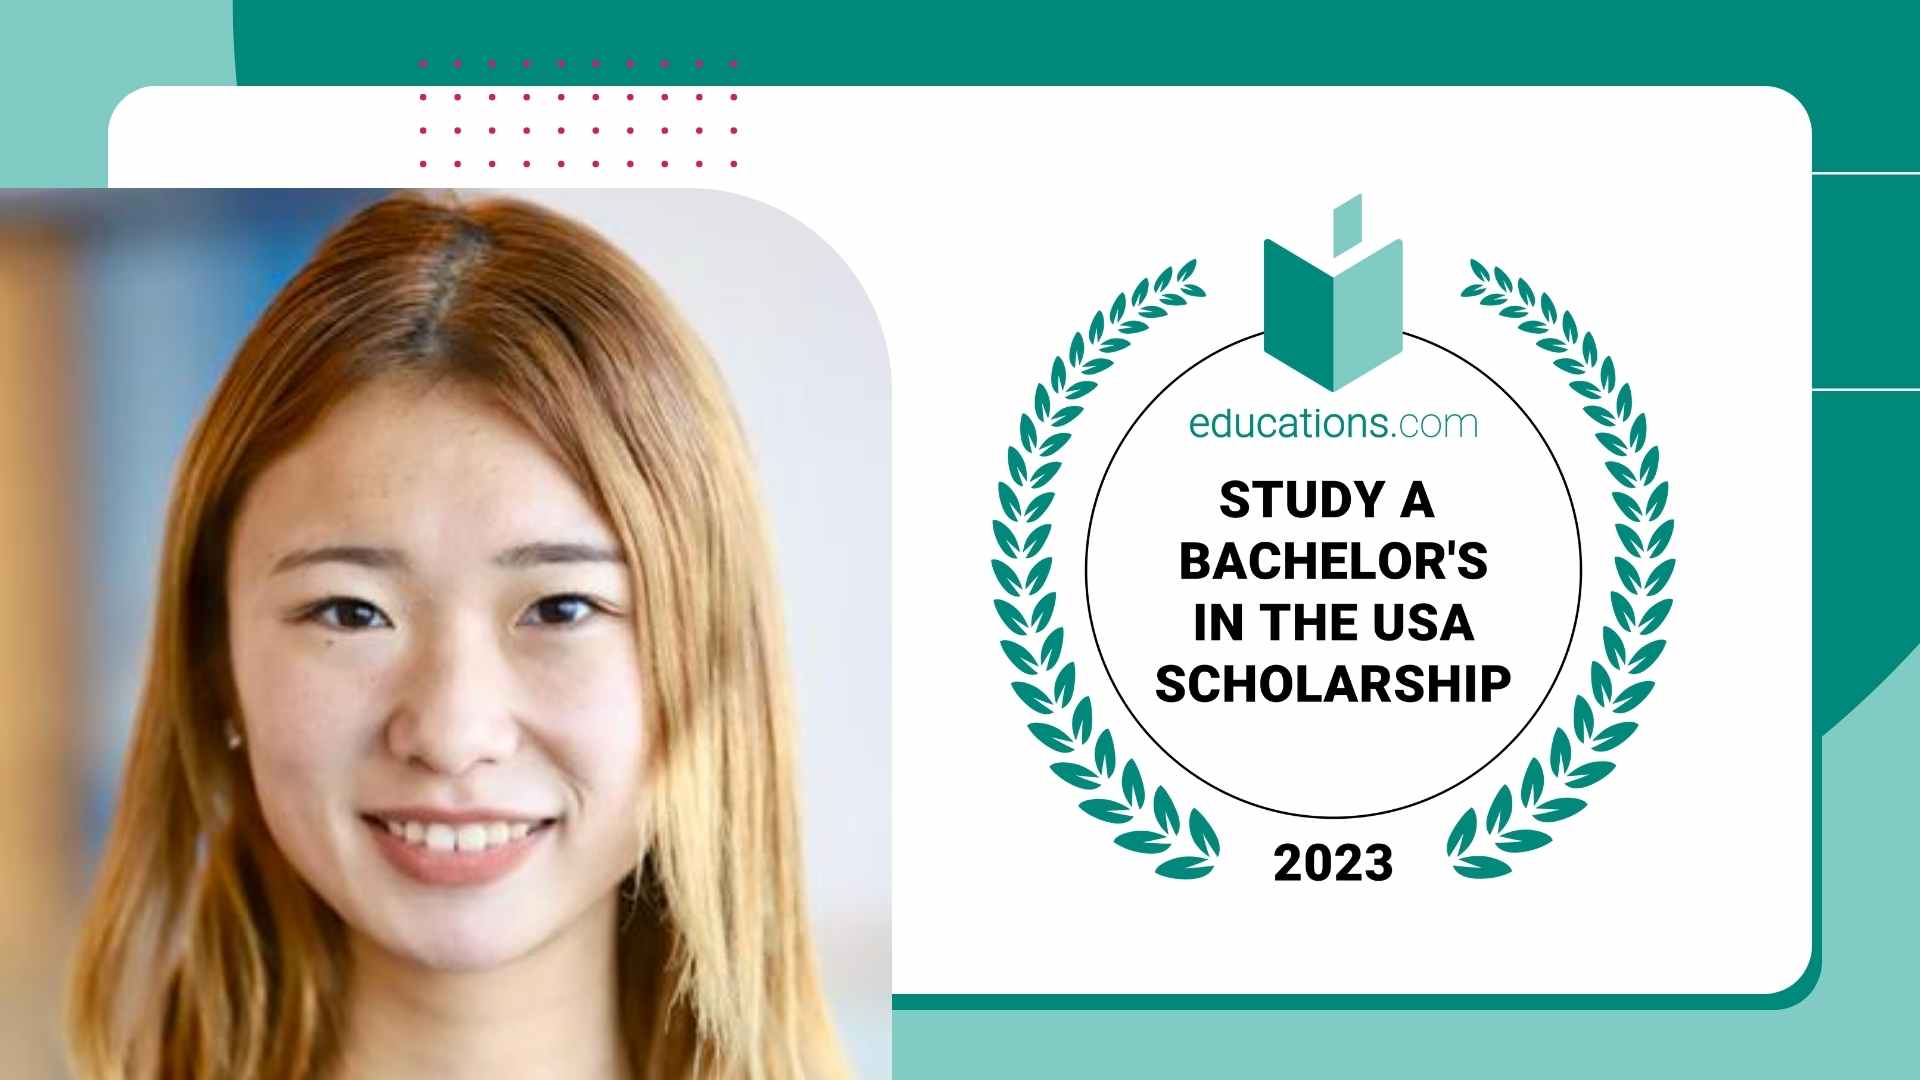 Winner of the Study a Bachelor's in the USA Scholarship 2023 by educations.com - Koto Imahori